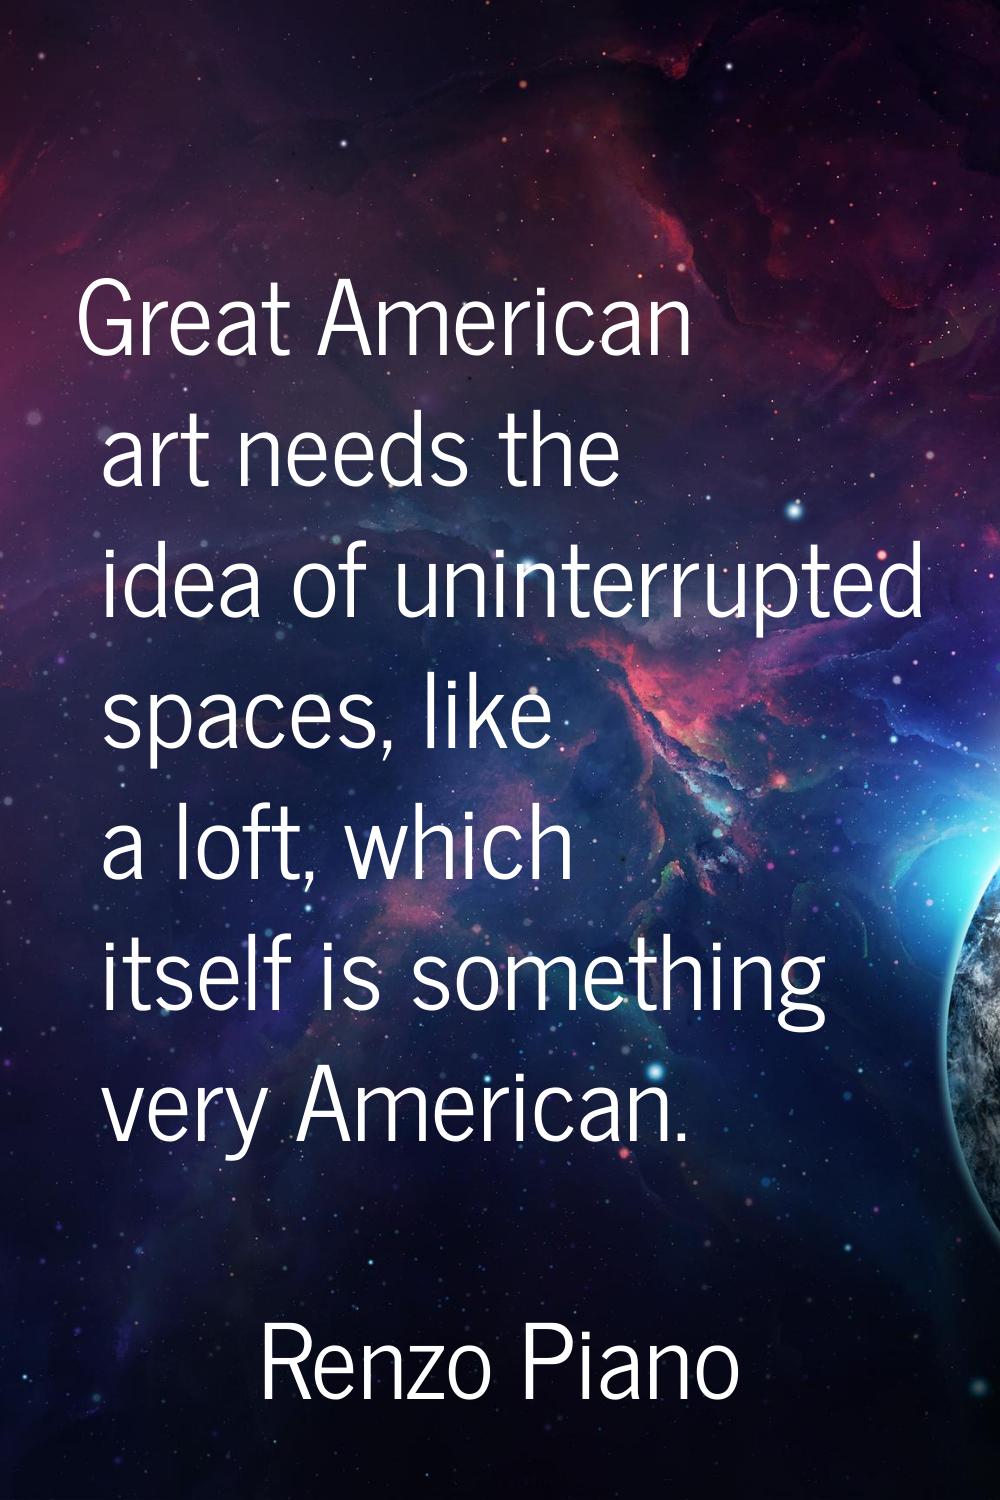 Great American art needs the idea of uninterrupted spaces, like a loft, which itself is something v